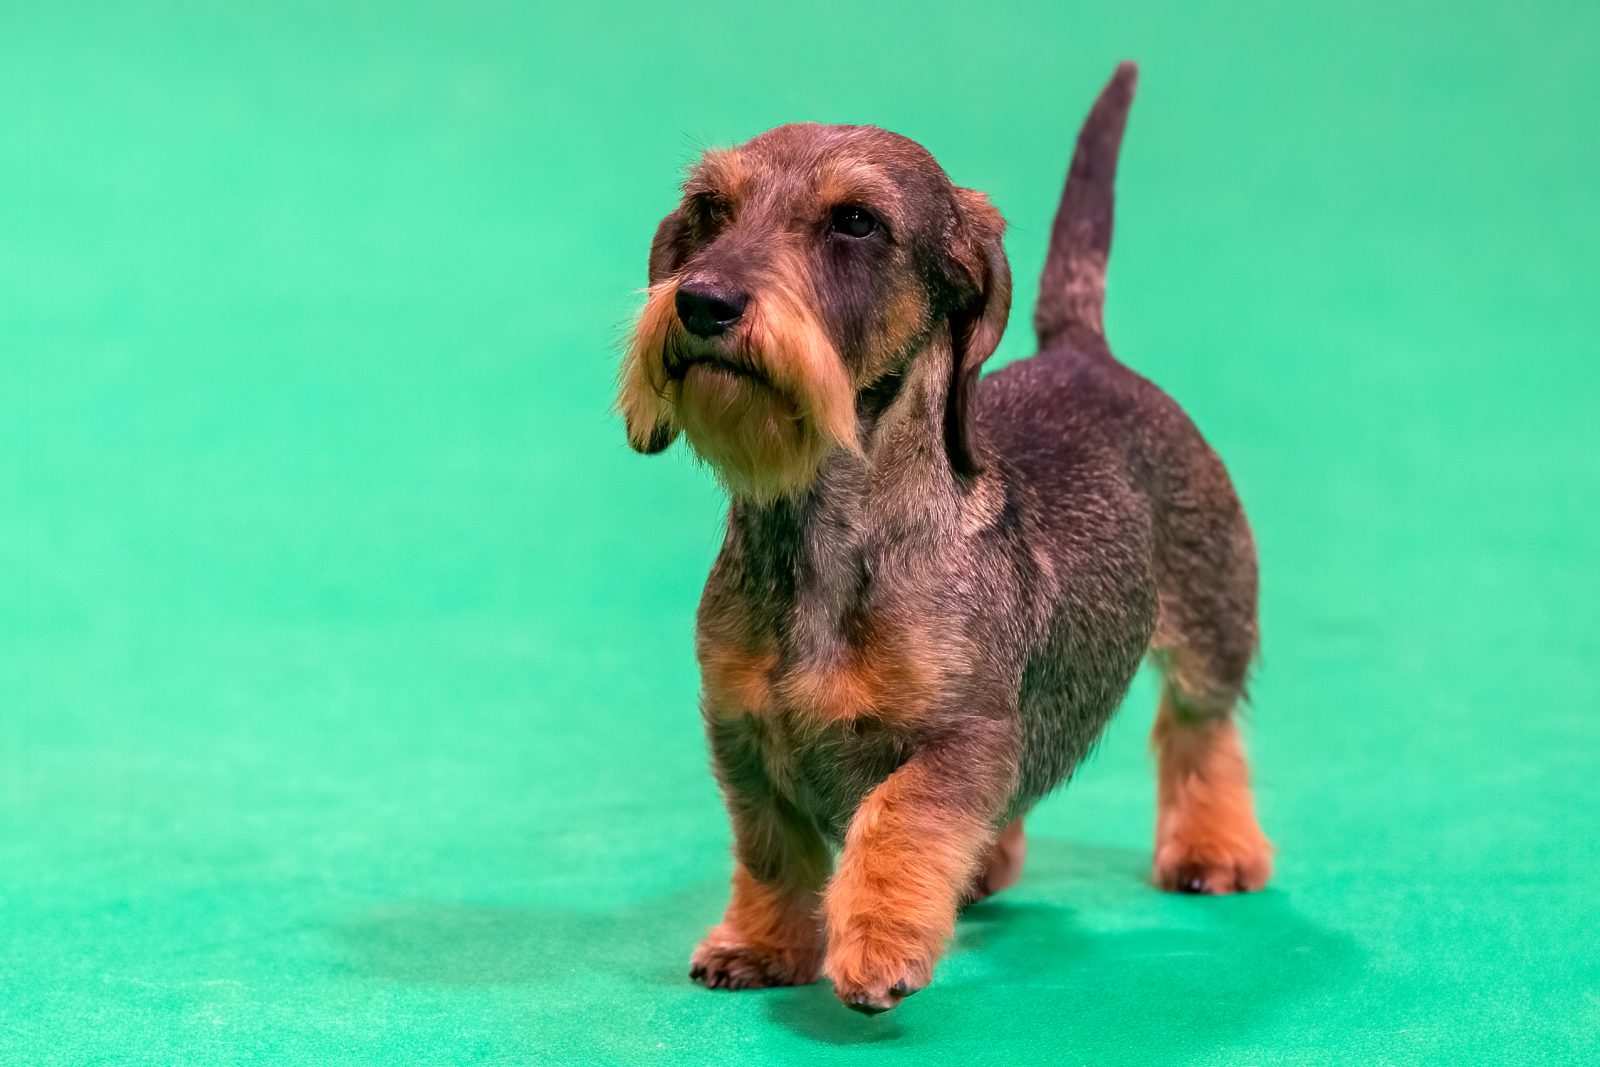 PETA Calls Channel 4 to Stop Airing Crufts Dog Show Because ‘No One Should Celebrate this Grotesque Charade’